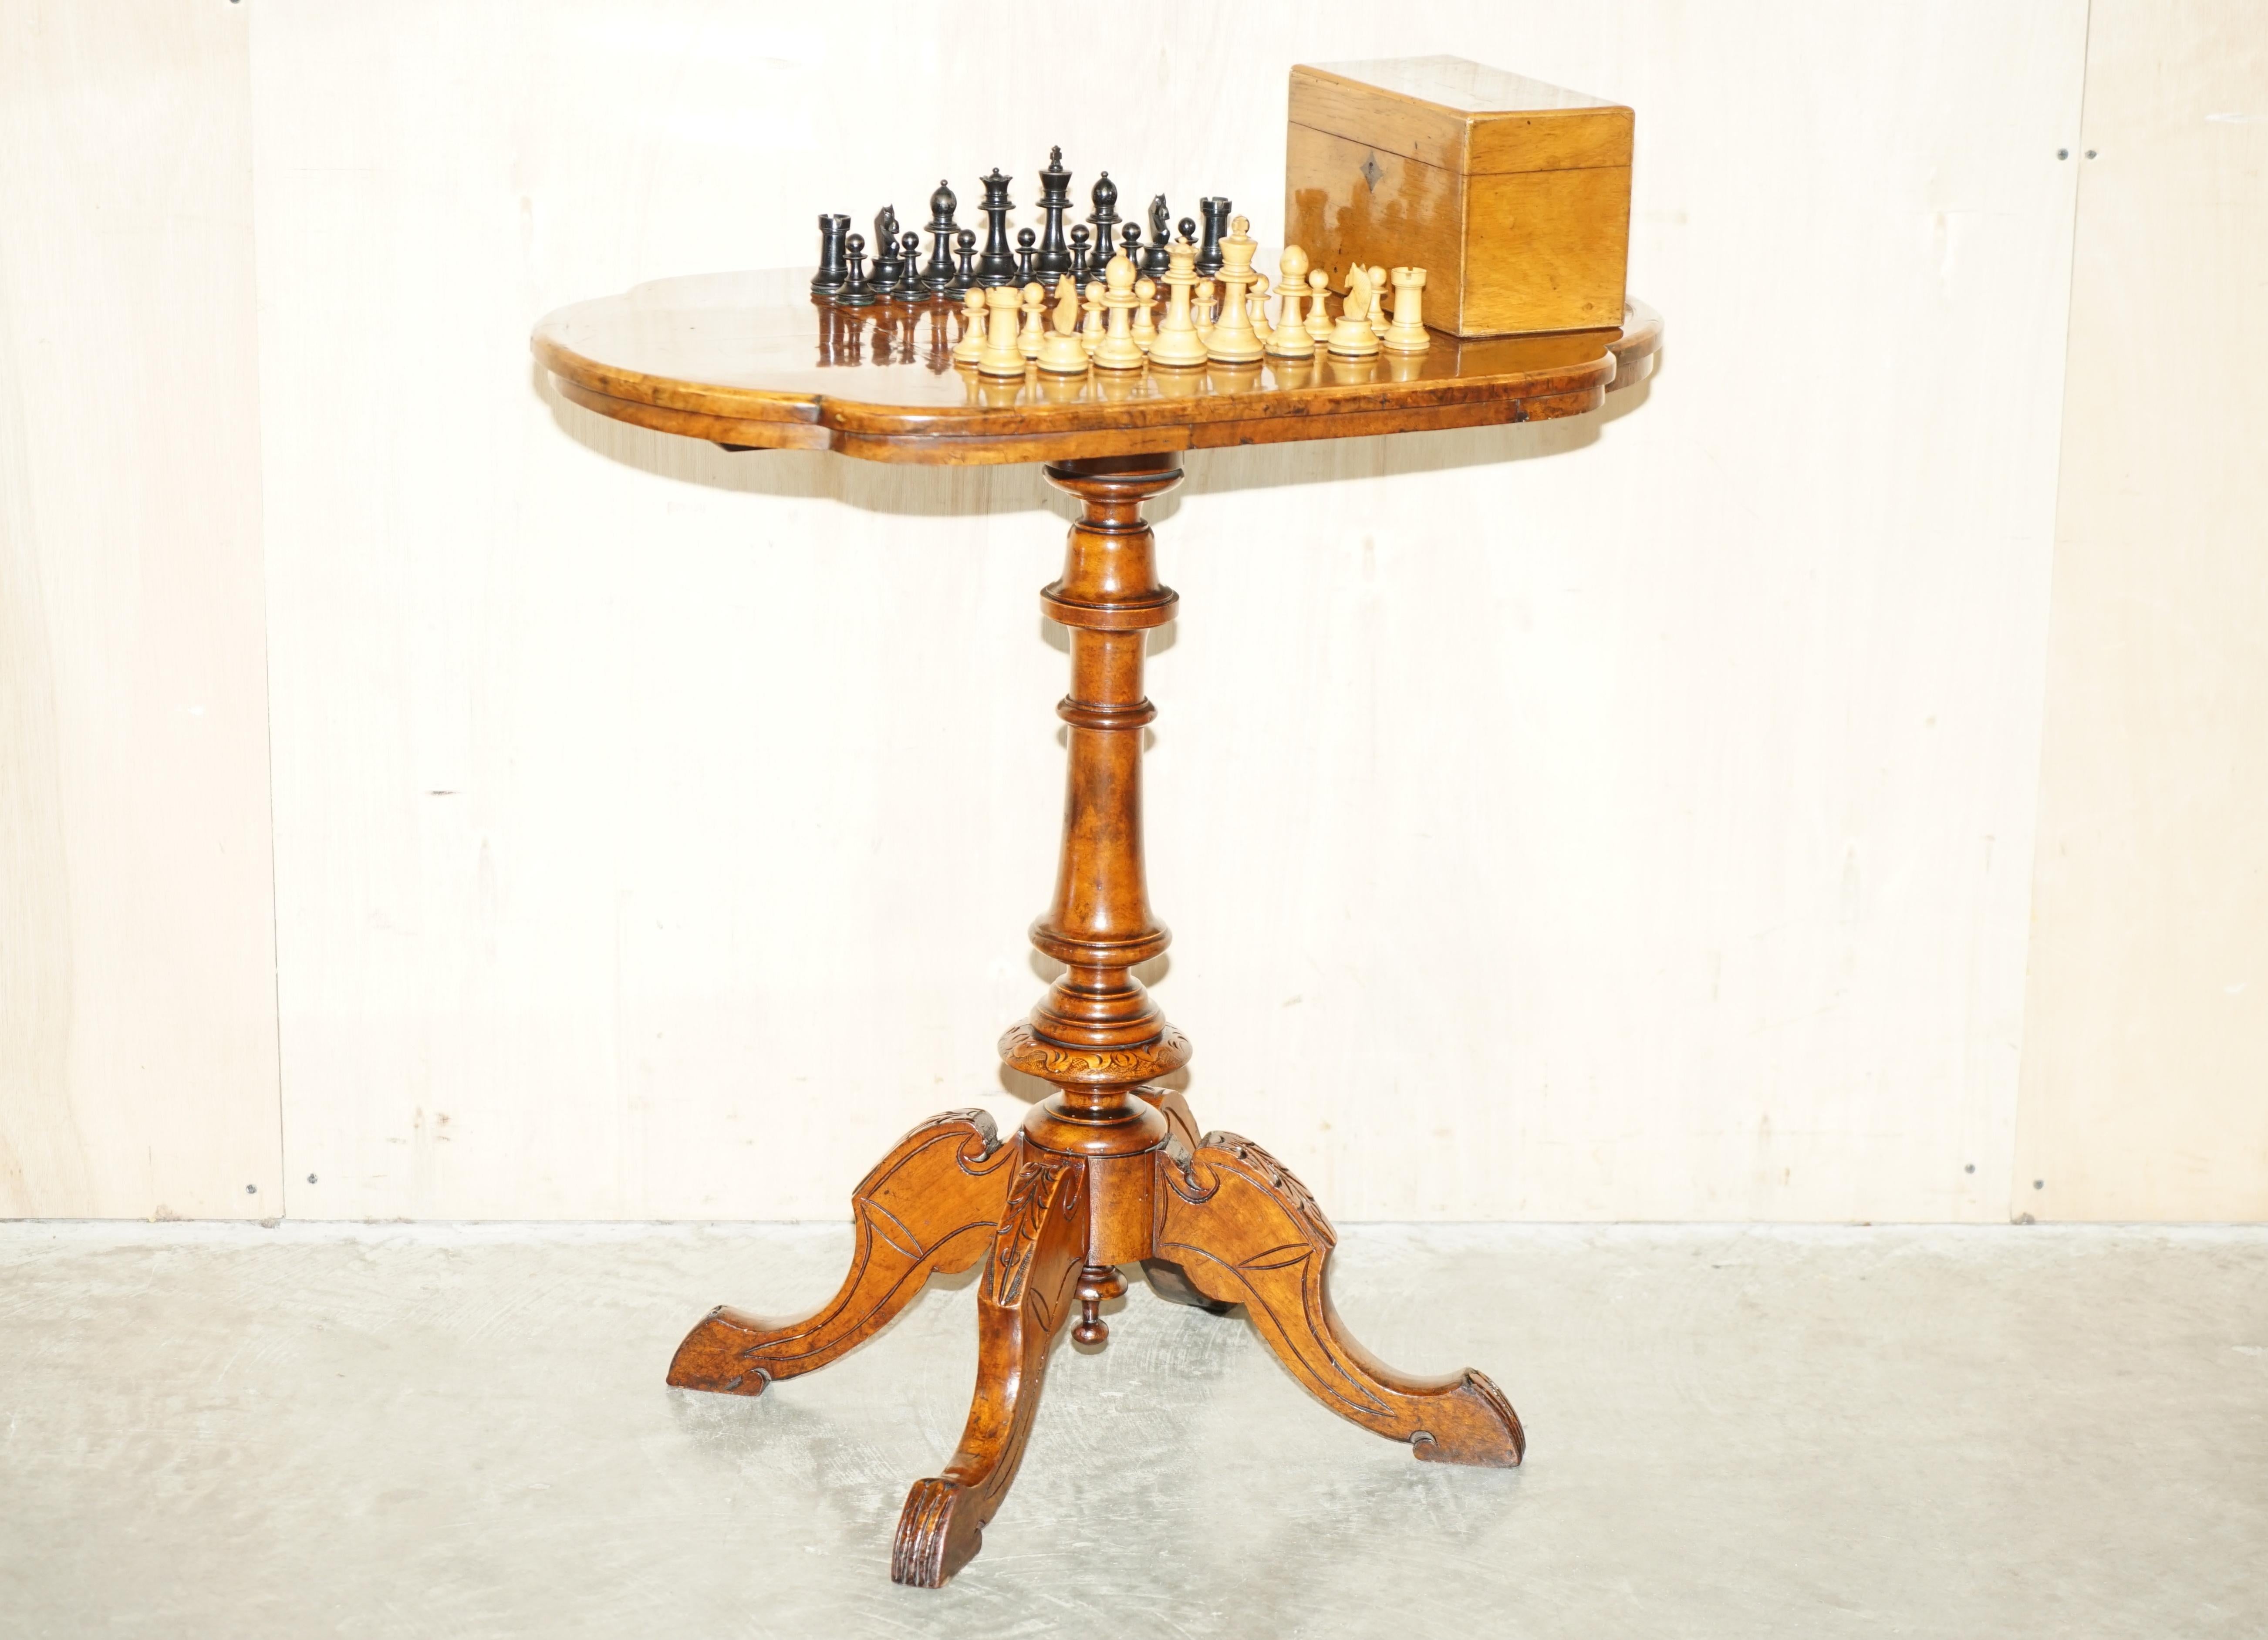 We are delighted to offer for sale this lovely circa 1880 hand made in England Burr Walnut folding chess table complete with Staunton chess set

A very good looking well-made and functional piece of antique furniture, it is extremely decorative,